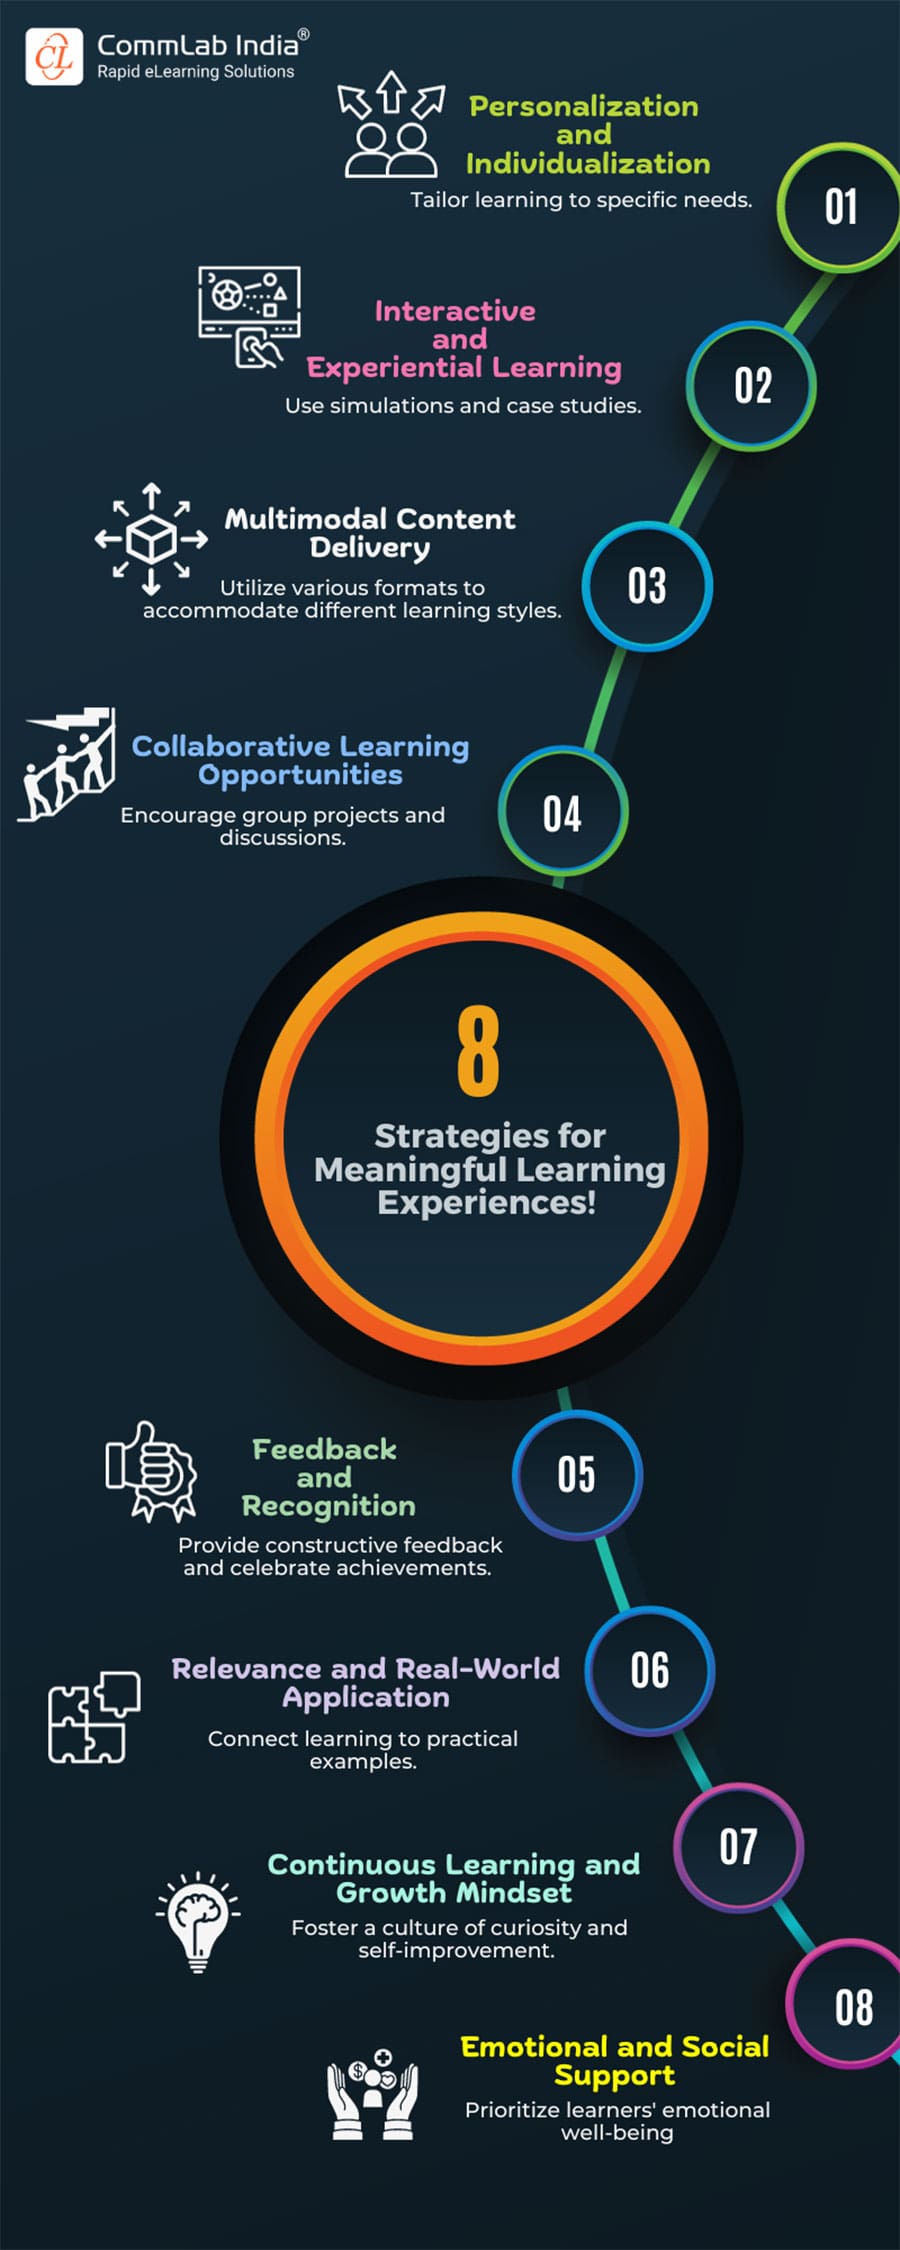 8 Strategies for Meaningful Learning Experiences